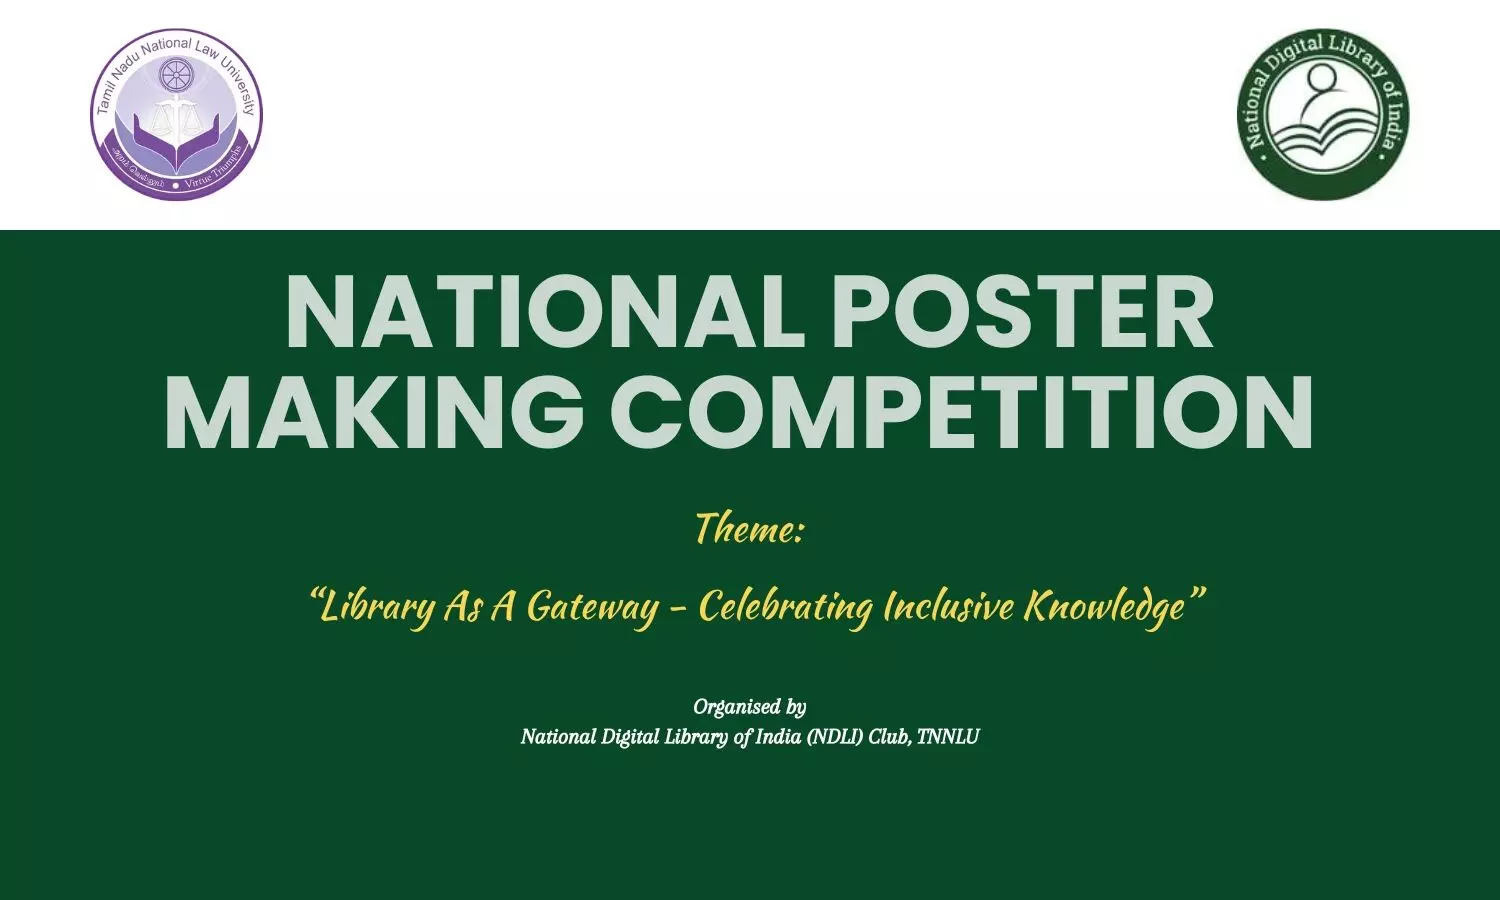 National Poster Making Competition | Tamil Nadu National Law University